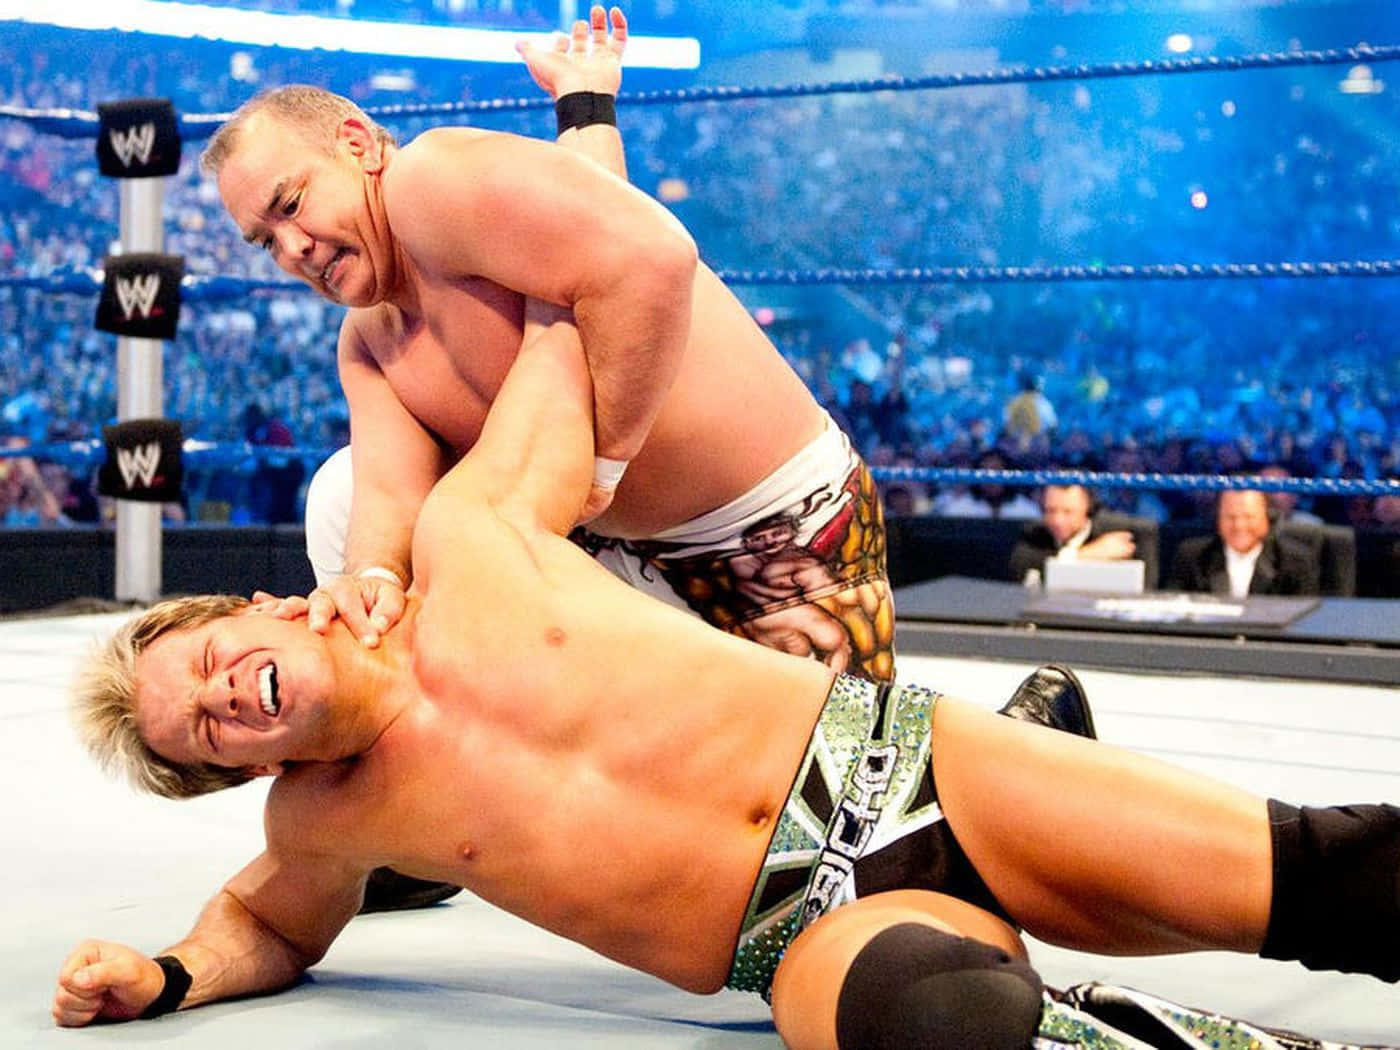 "Legendary Ricky Steamboat in Intense Match with Chris Jericho" Wallpaper